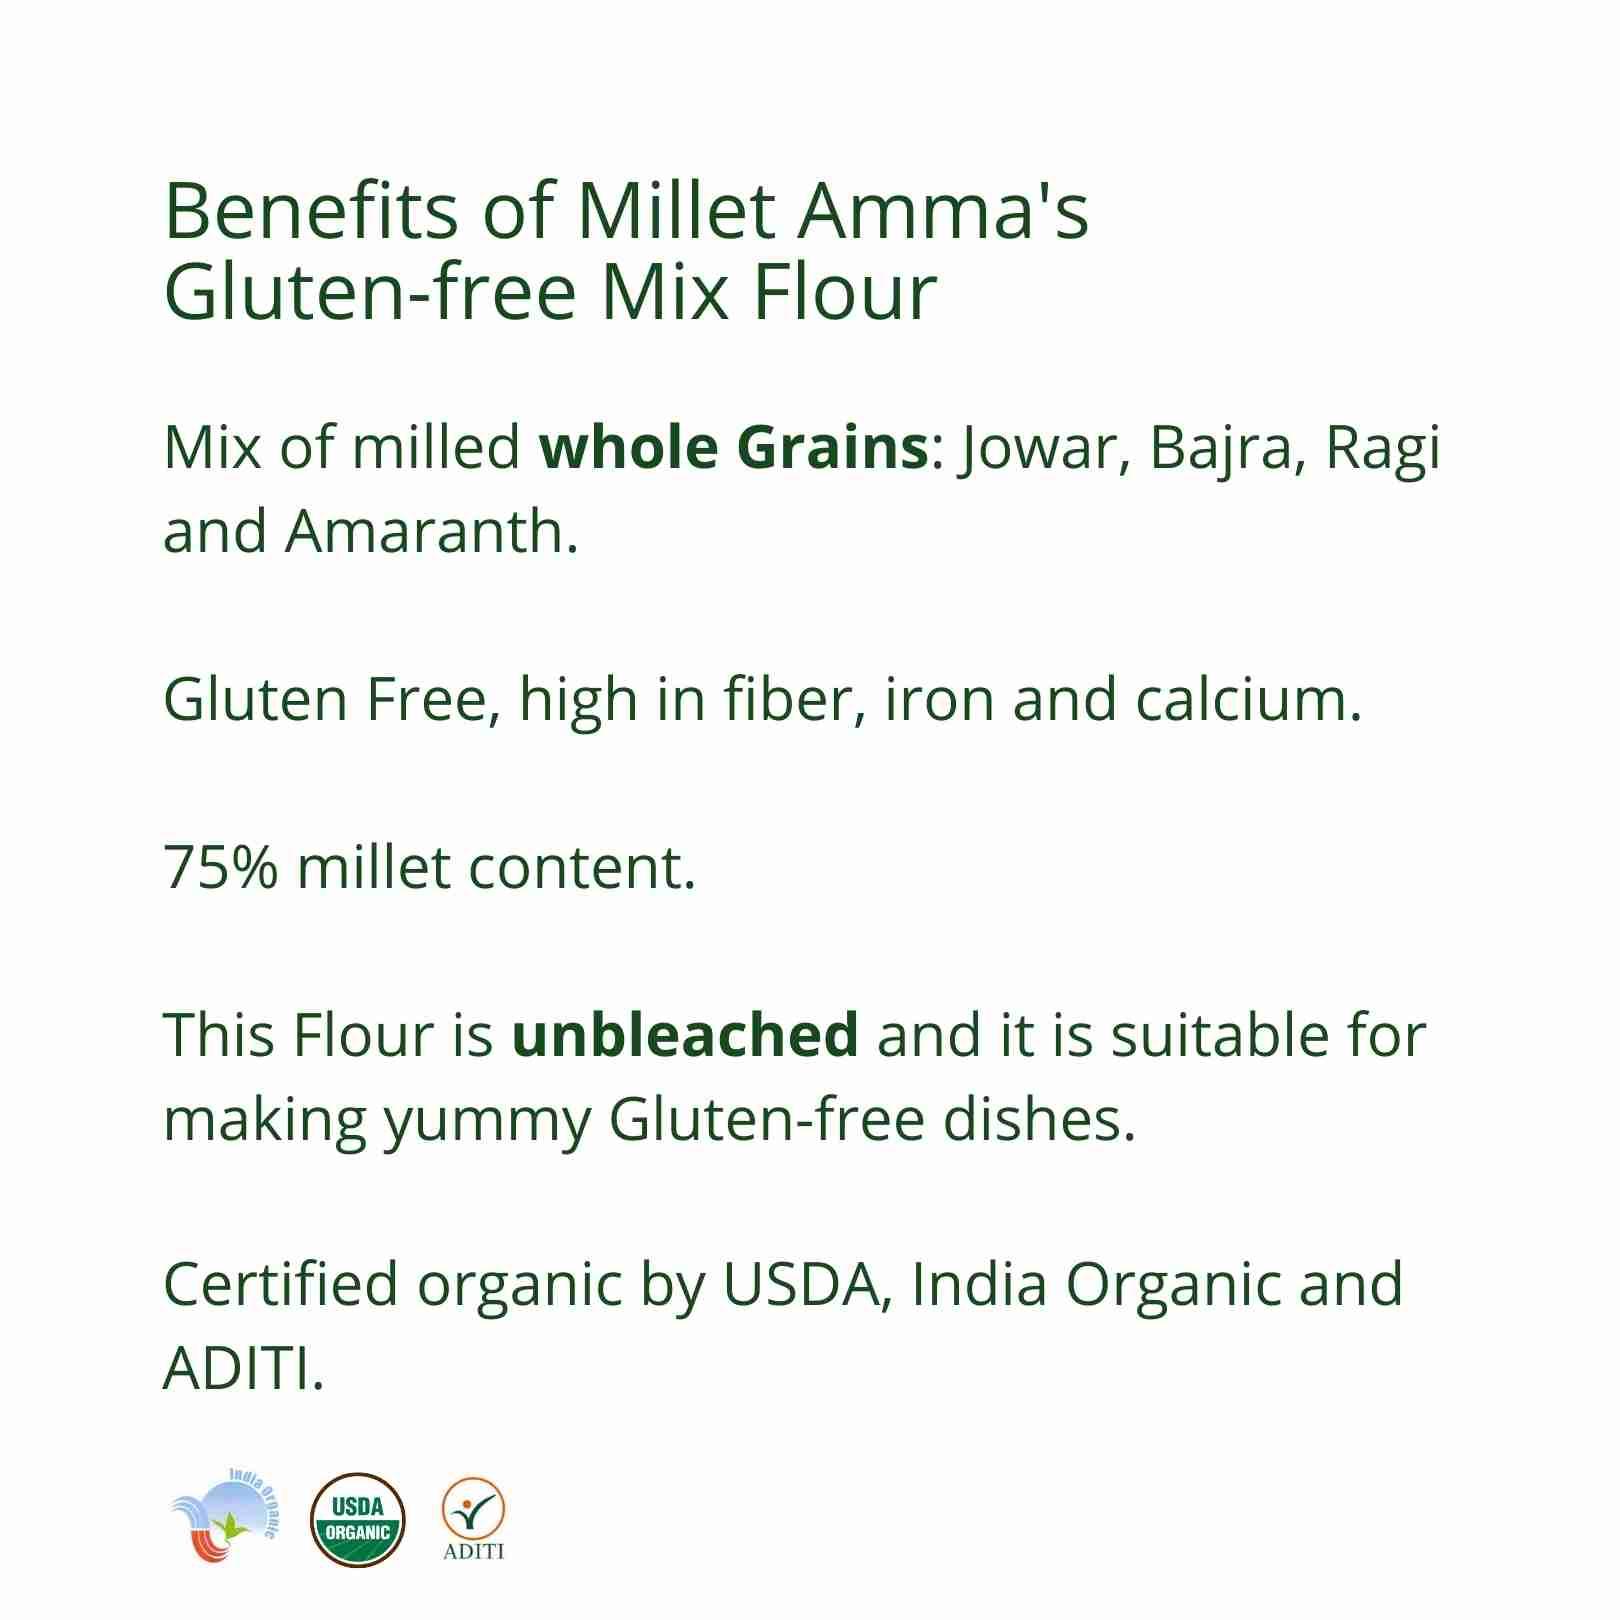 Millet Amma’s Gluten-free Mix Flour- Now you can finally make your favourite dishes healthy with our delicious and nutritious Gluten-free Mix Flour.  Made from Jowar, Bajra, Ragi and Amaranth, this flour mix is rich in fiber, calcium and phosphorus.  These grains are nutritious, help promote gut health, improve digestion and are loaded with essential micronutrients